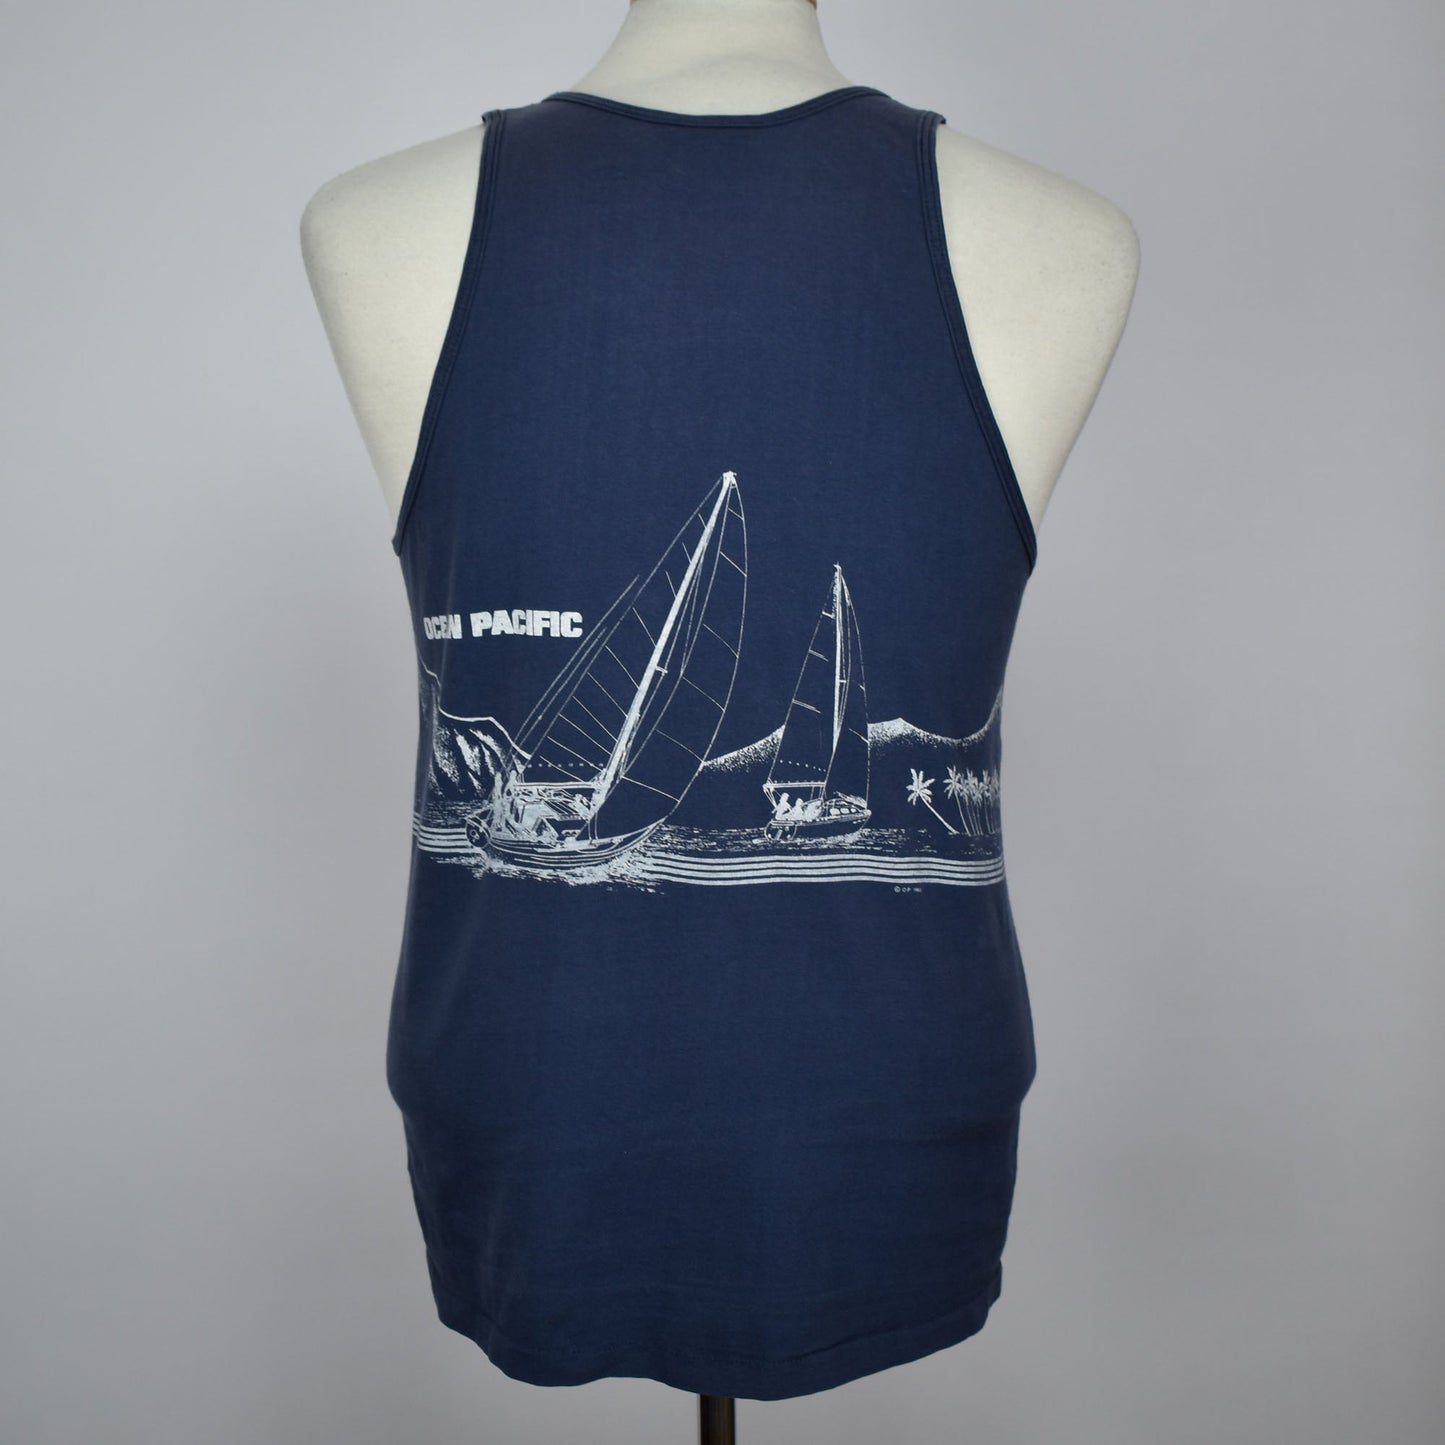 Vintage 80s Ocean Pacific Navy Blue Tank Top - Made in USA - Single Stitch - Size L